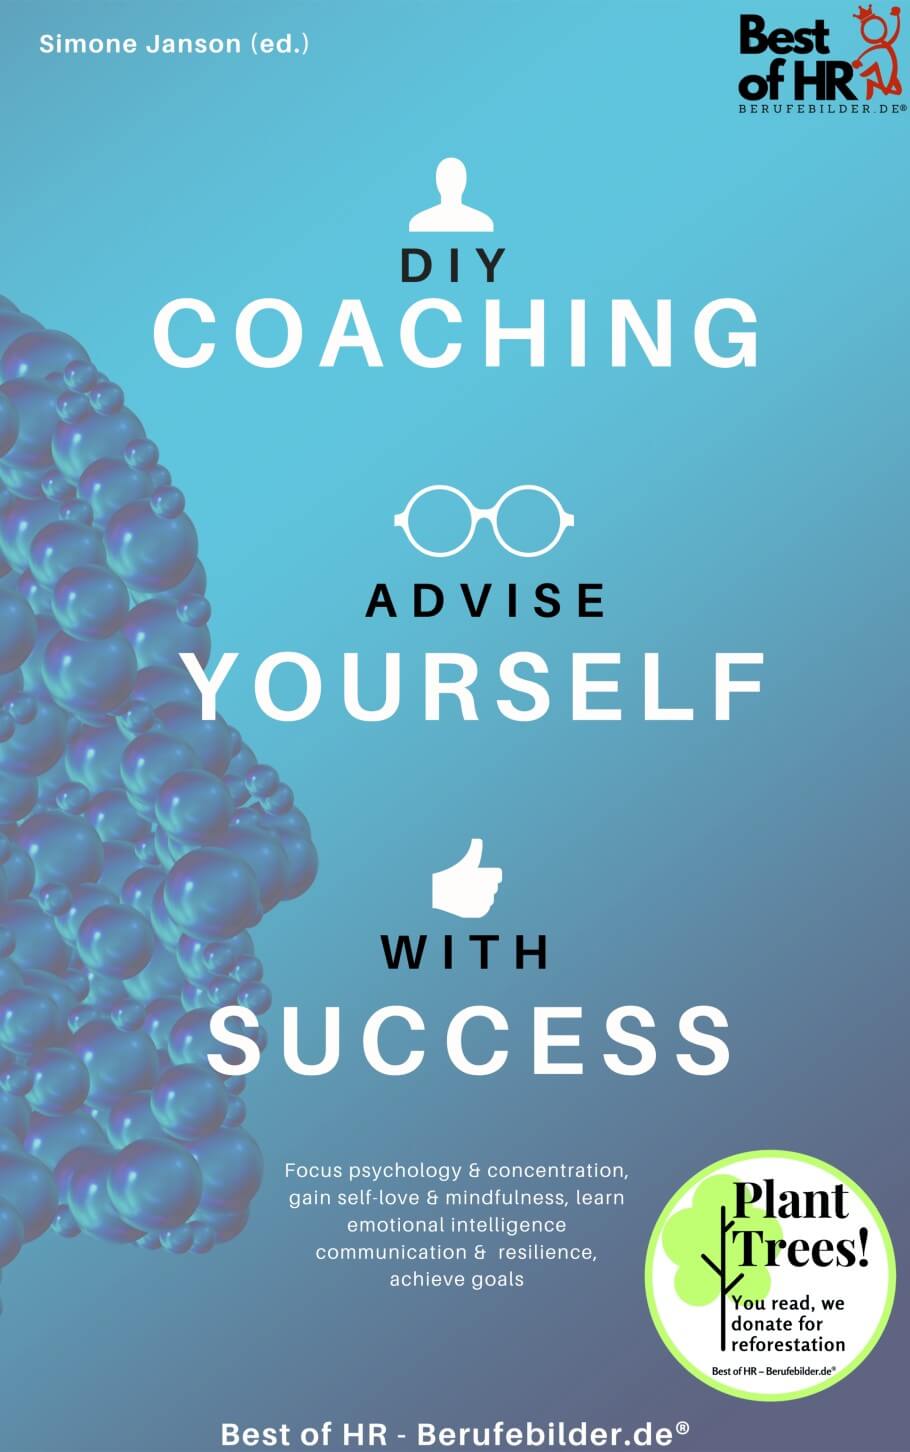 DIY-Coaching – Advise yourself with Success (Engl. Version)